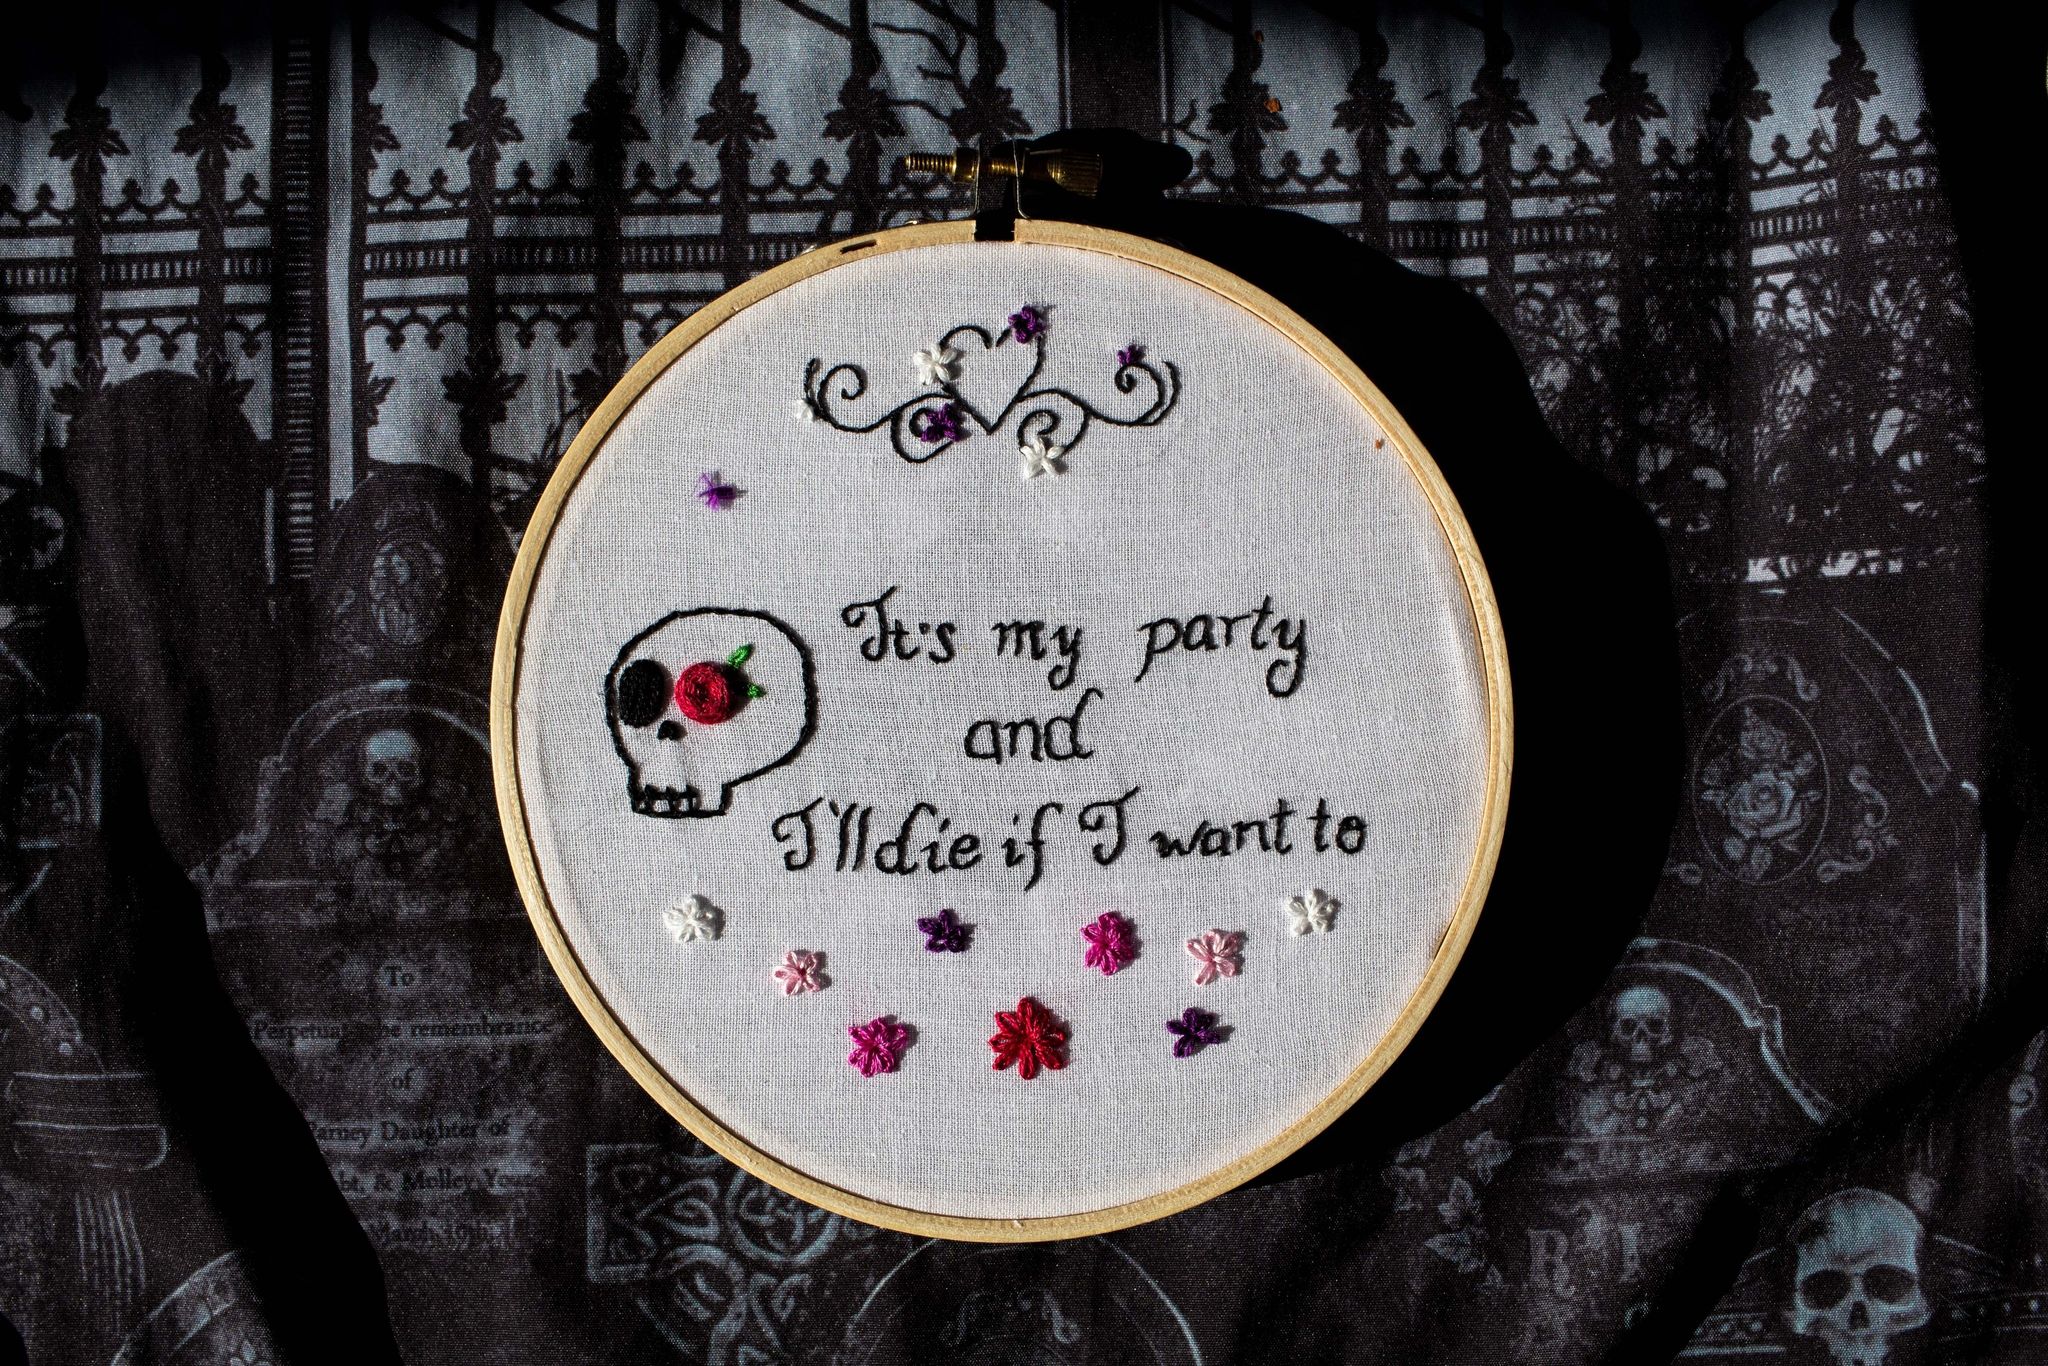 Product image of "It's MY Party" embroidery on  a cemetery backdrop